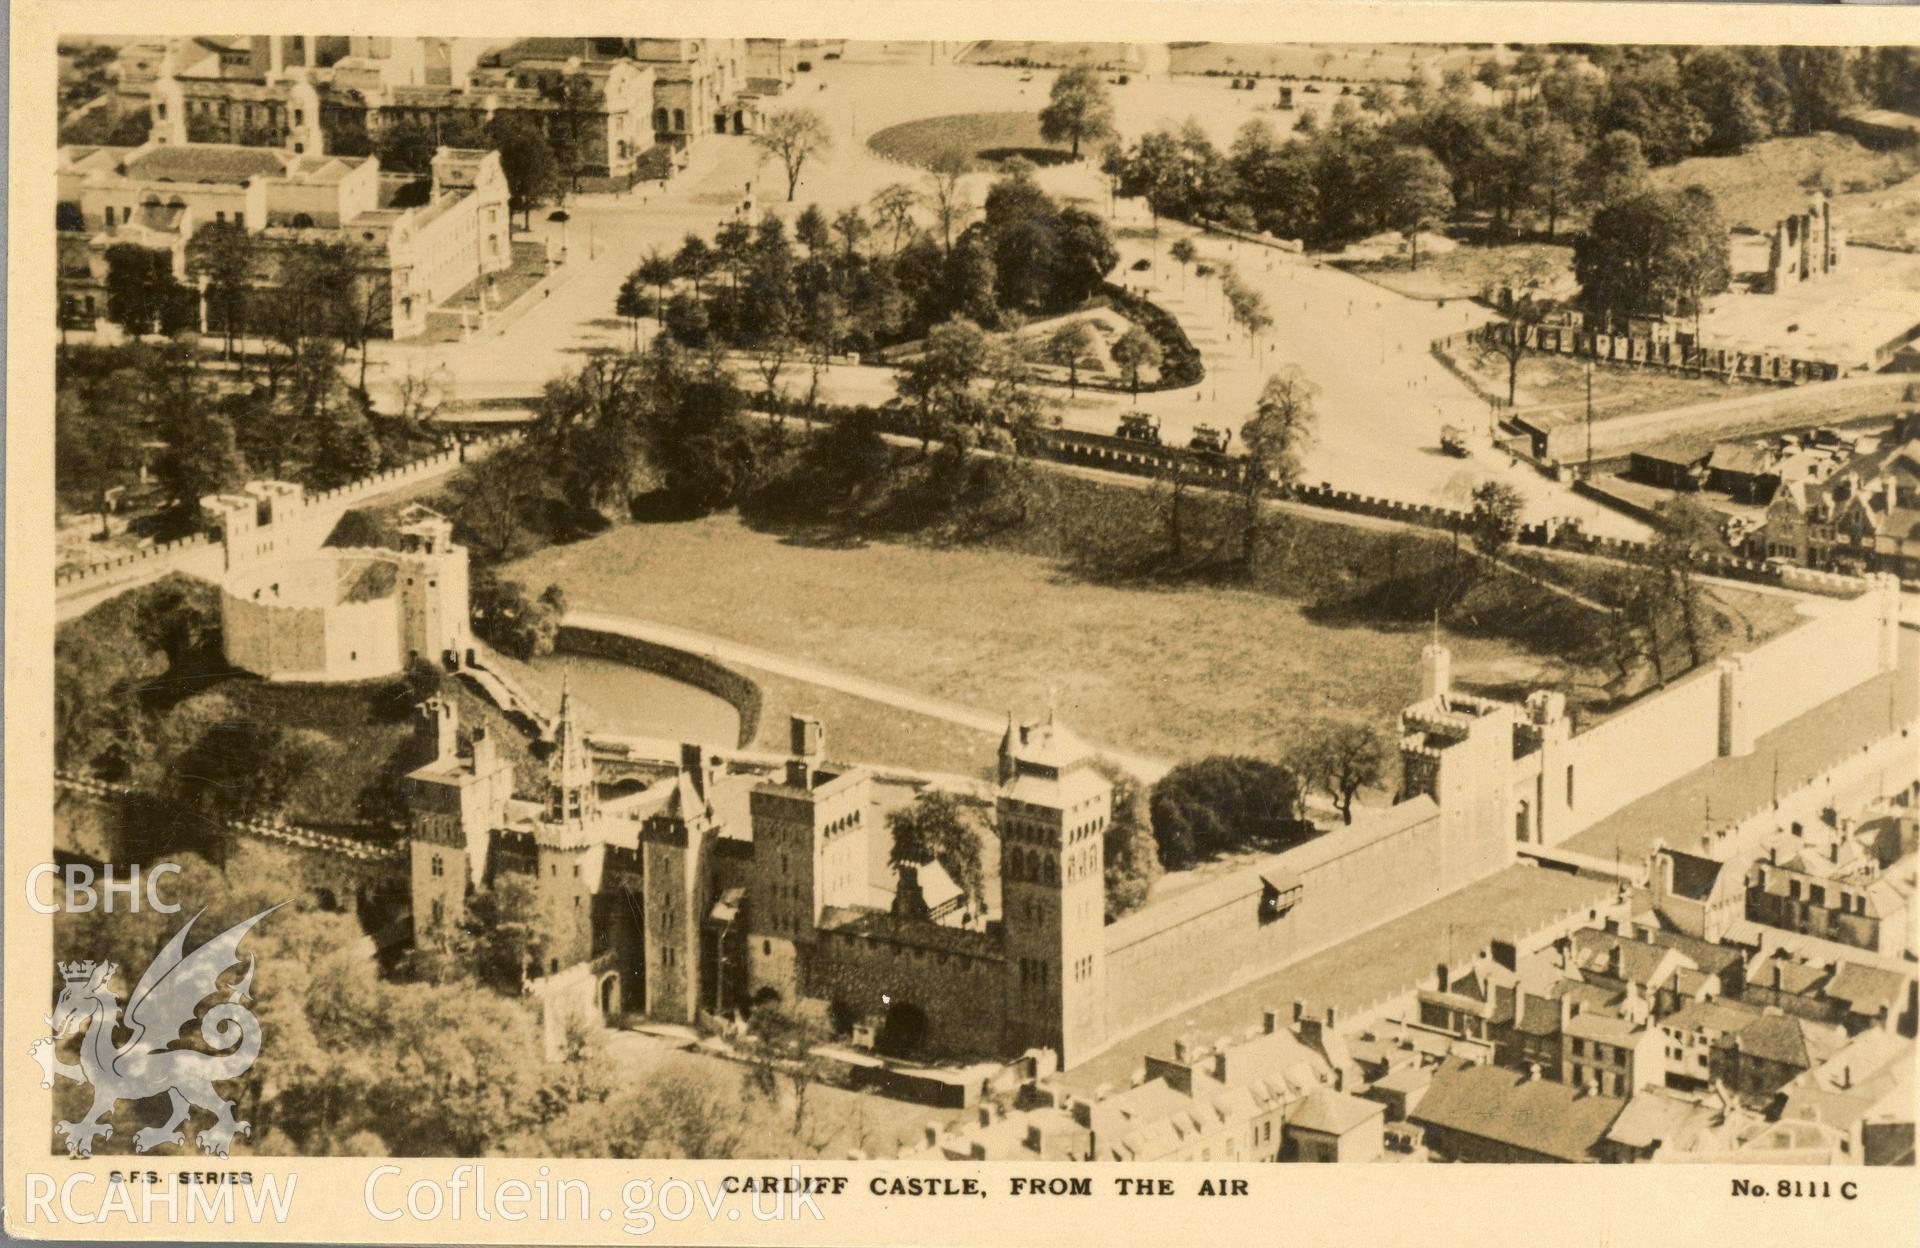 Digitised postcard image of areial oblique view of Cardiff castle, Surrey Flying Services Croydon No 8111C. Produced by Parks and Gardens Data Services, from an original item in the Peter Davis Collection at Parks and Gardens UK. We hold only web-resolution images of this collection, suitable for viewing on screen and for research purposes only. We do not hold the original images, or publication quality scans.